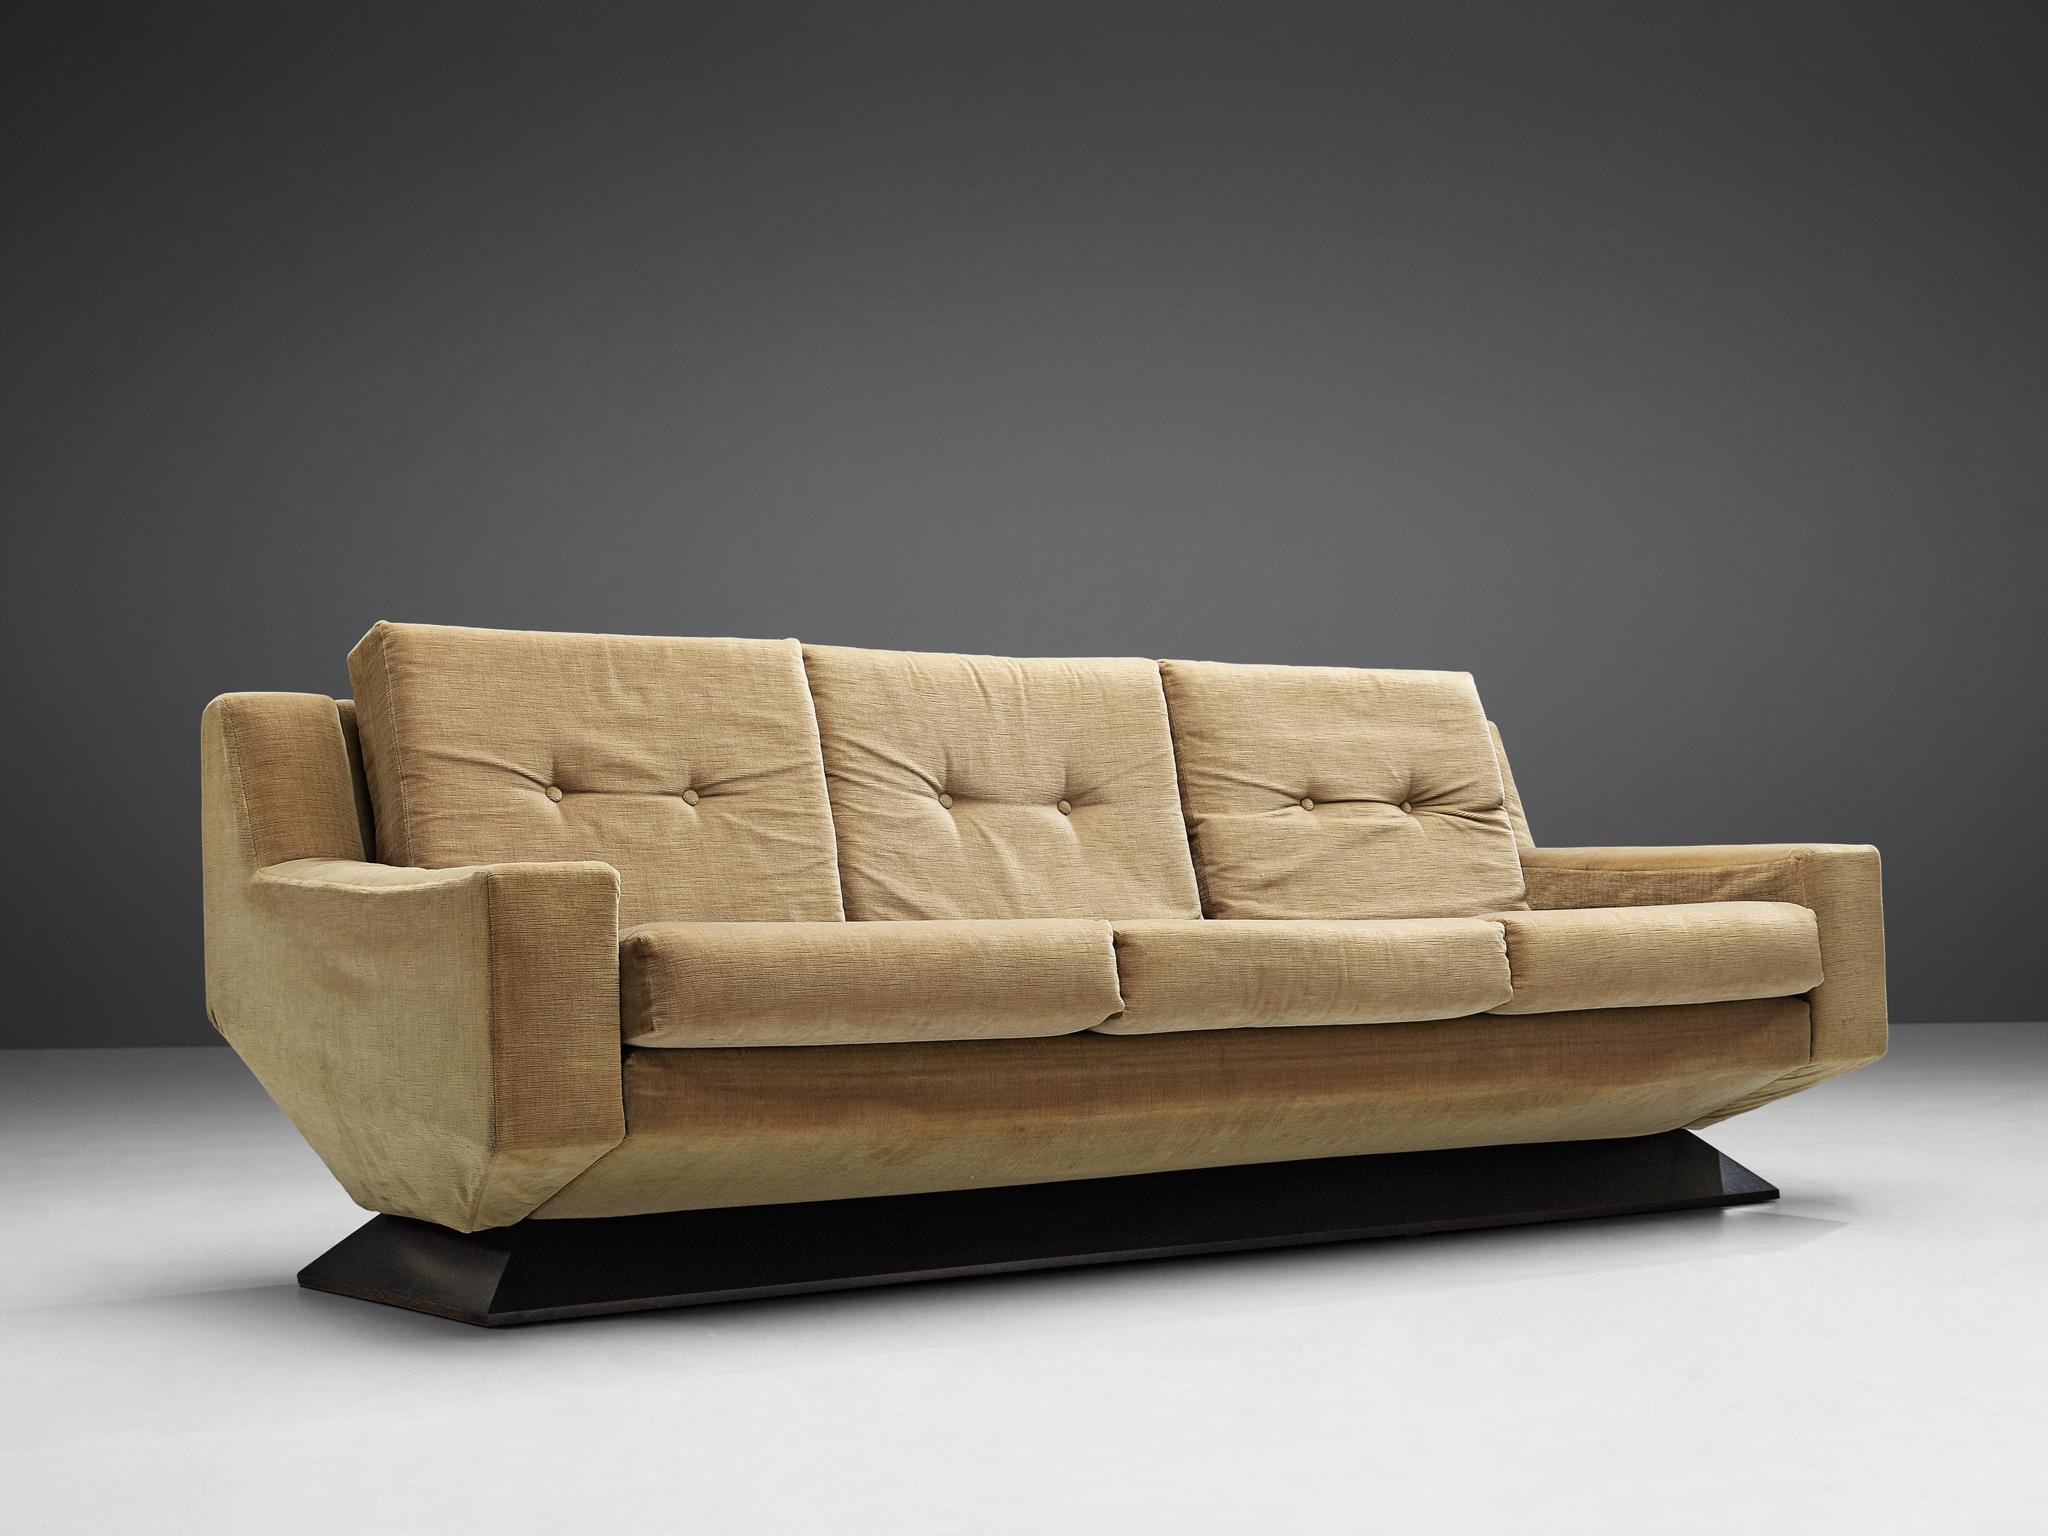 Sofa, velvet, wood, Italy, 1960s

Geometry is at the forefront of this sofa, expressed through clear lines and angular shapes. The sofa has a very dynamic and abundant appearance and the beige velvet upholstery gives this piece a luxurious feel. The